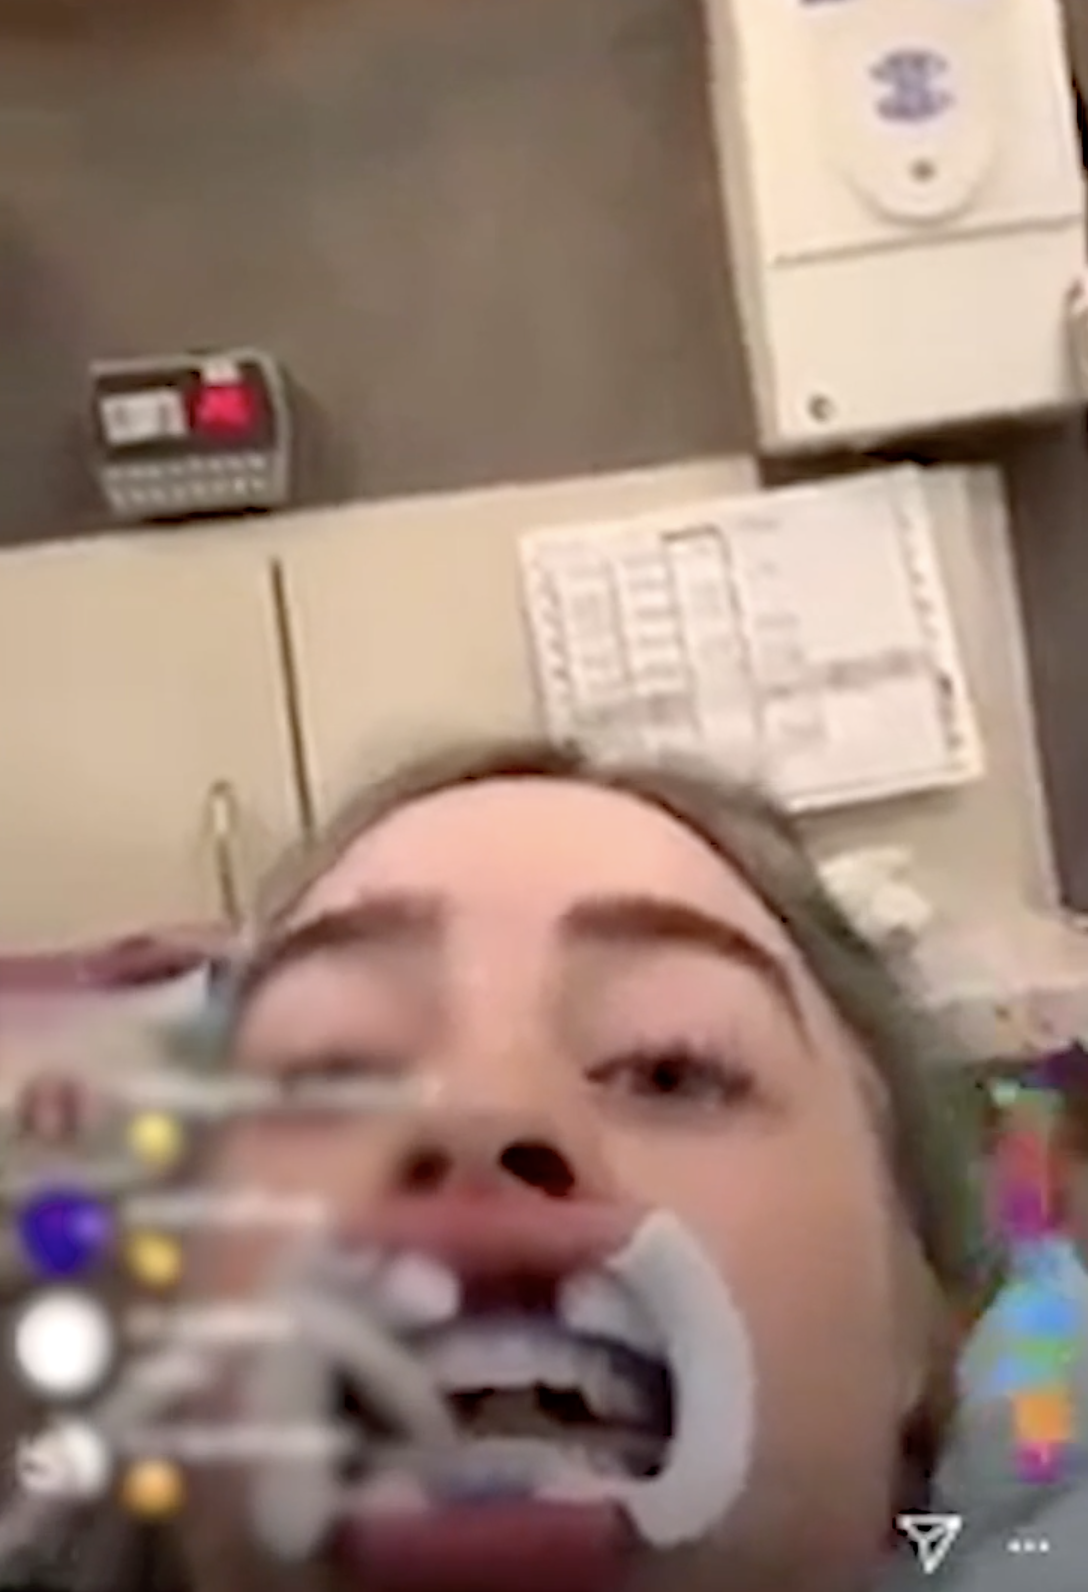 Billie Elish at the dentist as a dental assistant works on her teeth